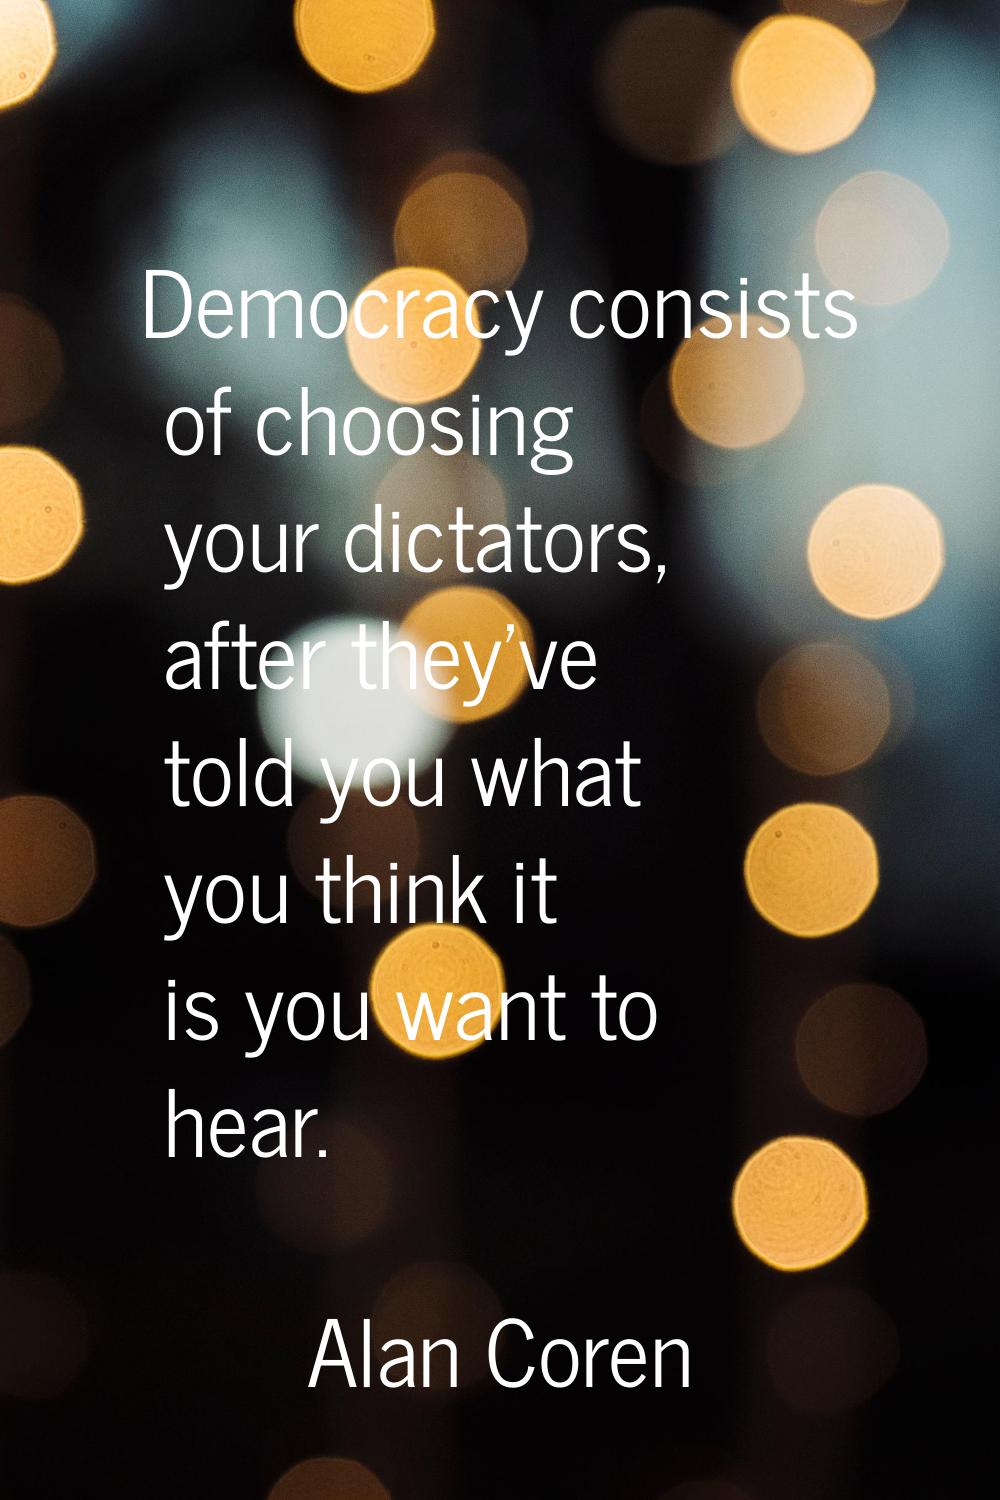 Democracy consists of choosing your dictators, after they've told you what you think it is you want